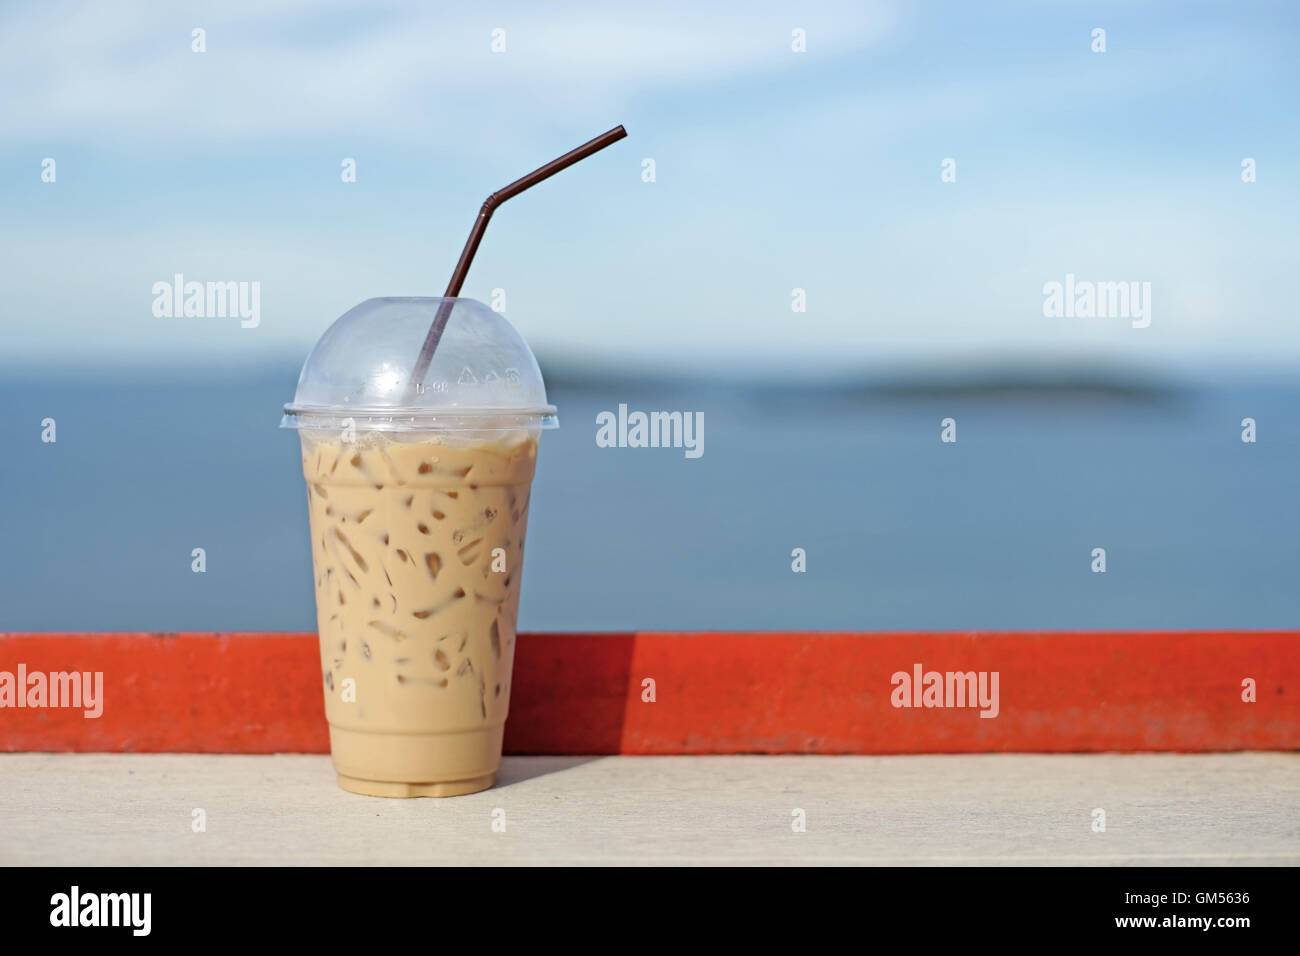 Iced Coffee In Takeaway Cup Stock Photo, Picture and Royalty Free Image.  Image 57801460.